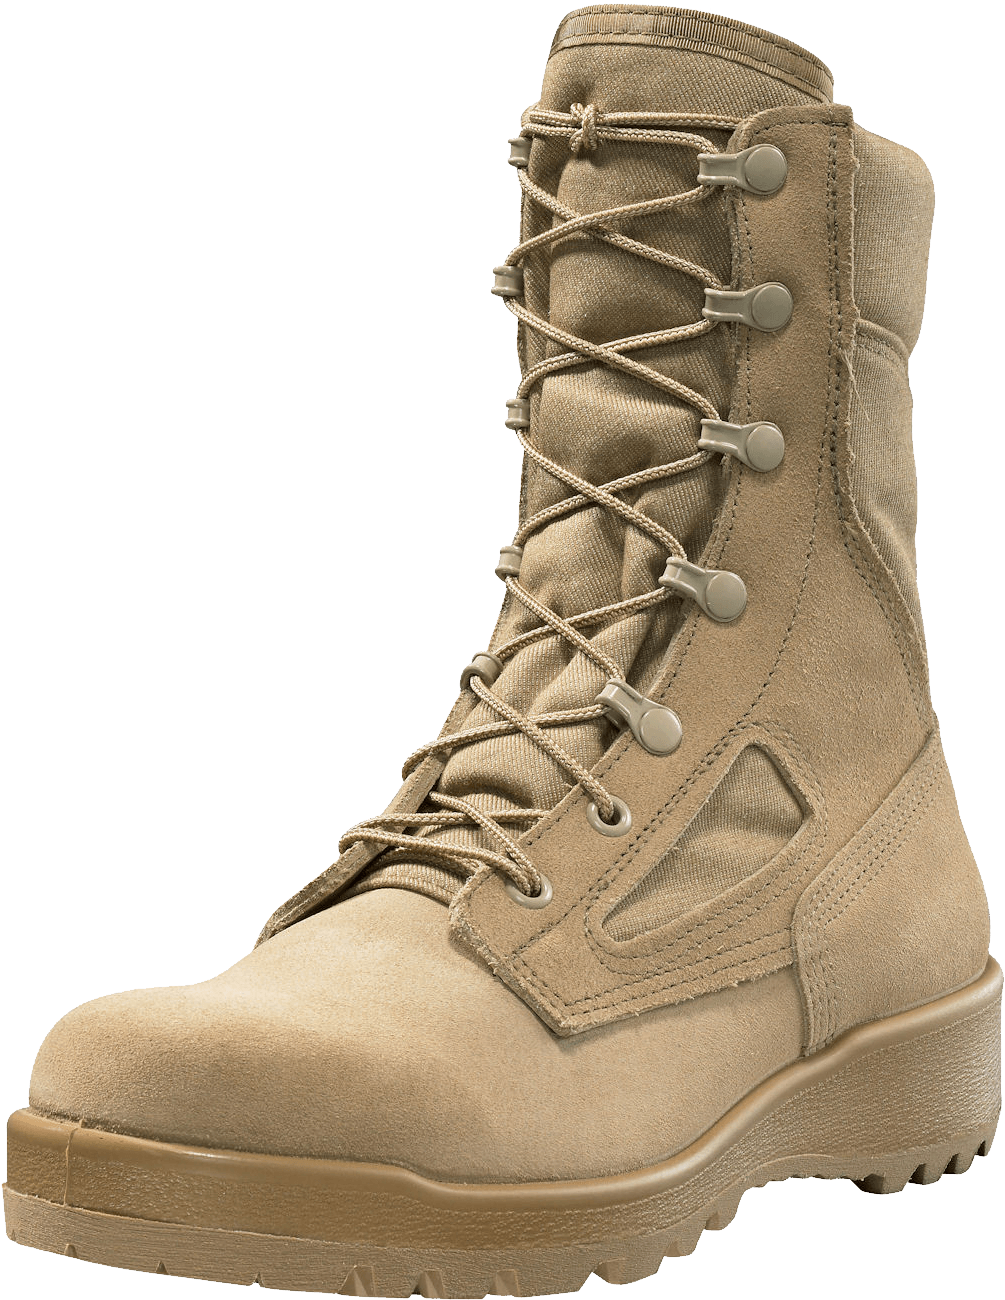 Combat Boots Png Image PNG Image